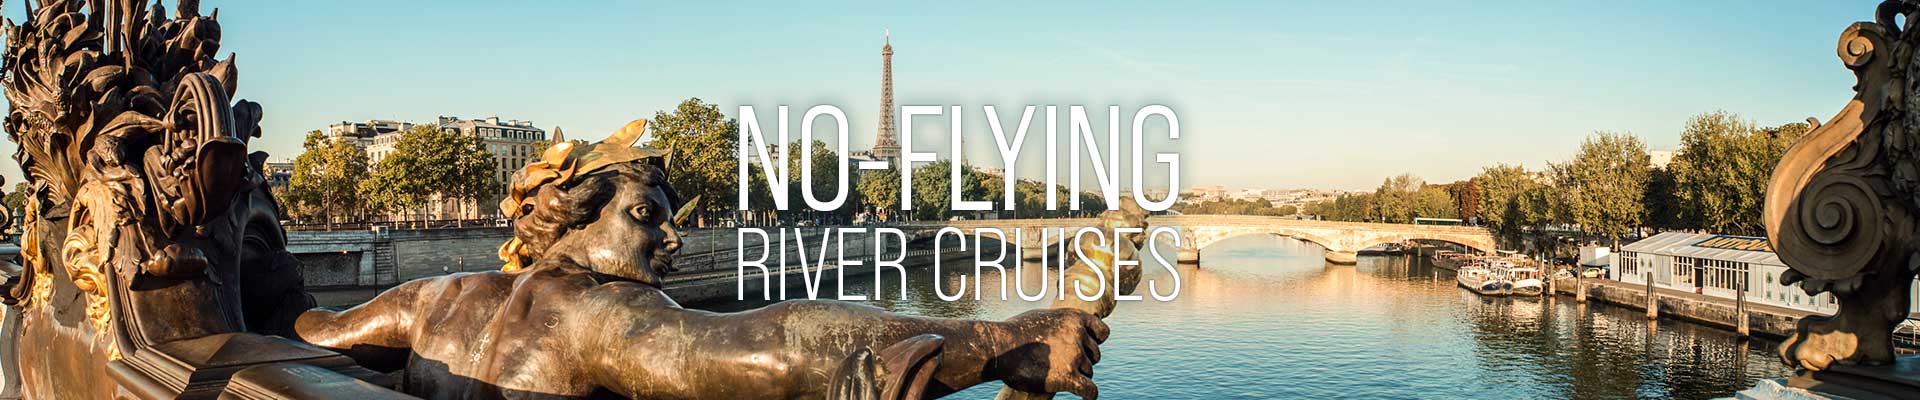 No Flying River Cruise Offers